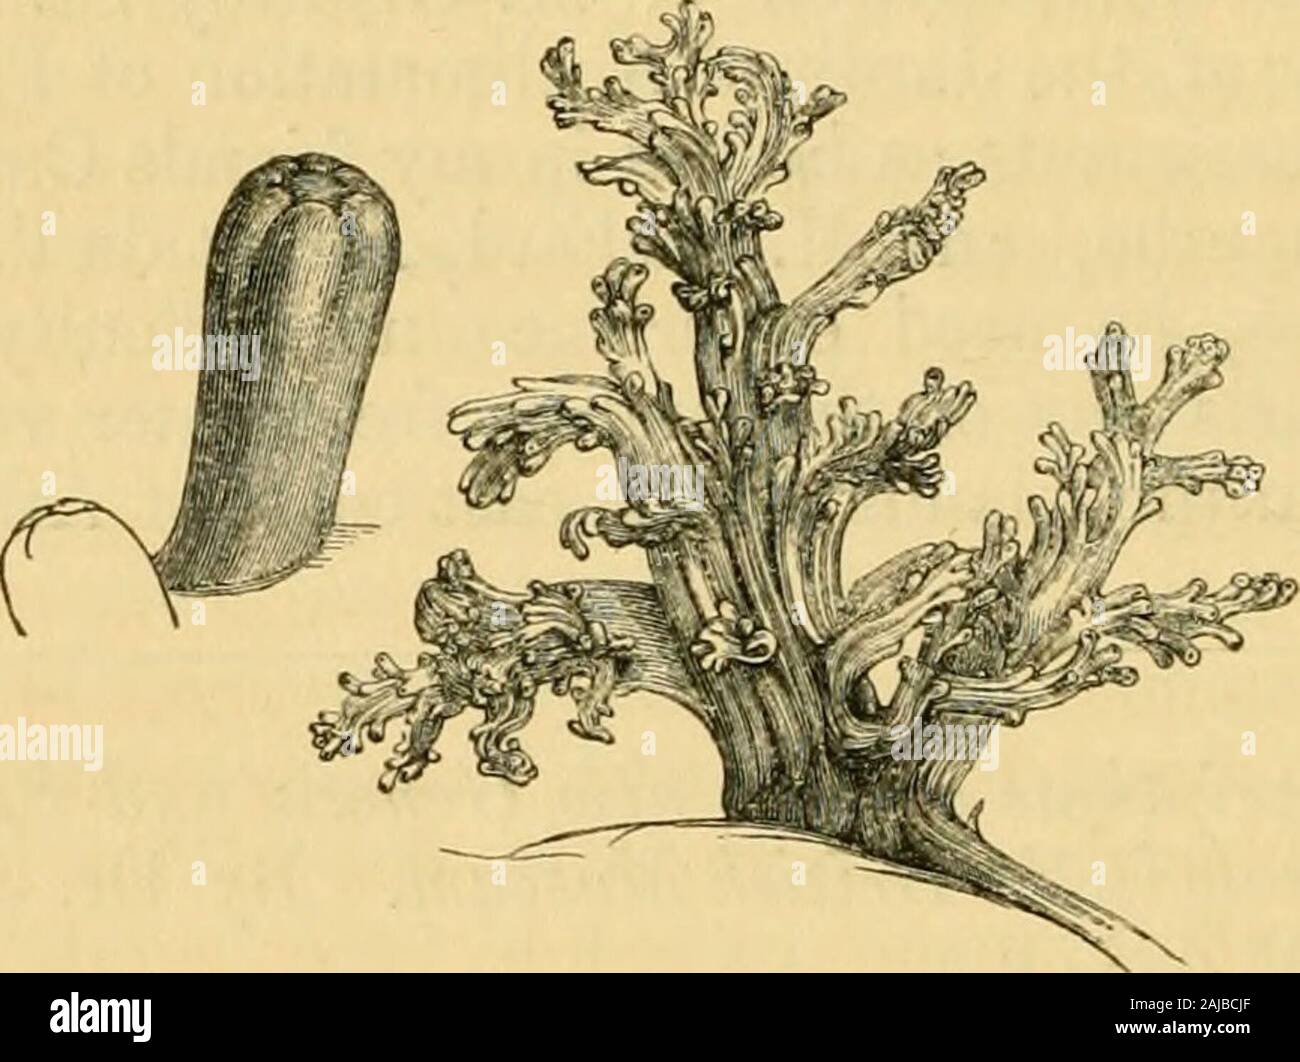 The Annals and magazine of natural history; zoology, botany, and geology . Marj.N. Hist. Ser. 4. TV. ii. 31 442 Dr. J. E. Gray on neio Genera and Species of Lemnalia. Coral soft, fleshy, formed of numerous clustered, small,cylindrical tubes; the outer surface is smooth, destitute of anyappearance of spicules, but showing by grooves the places ofunion of the different tubes that form the mass, each tubeending in a polype. The base is broad, expanded horizon-tally, fleshy like the coral, throwing up several stems, whichare irregularly branched, the lateral branches being somewhattwo-rowed, the t Stock Photo